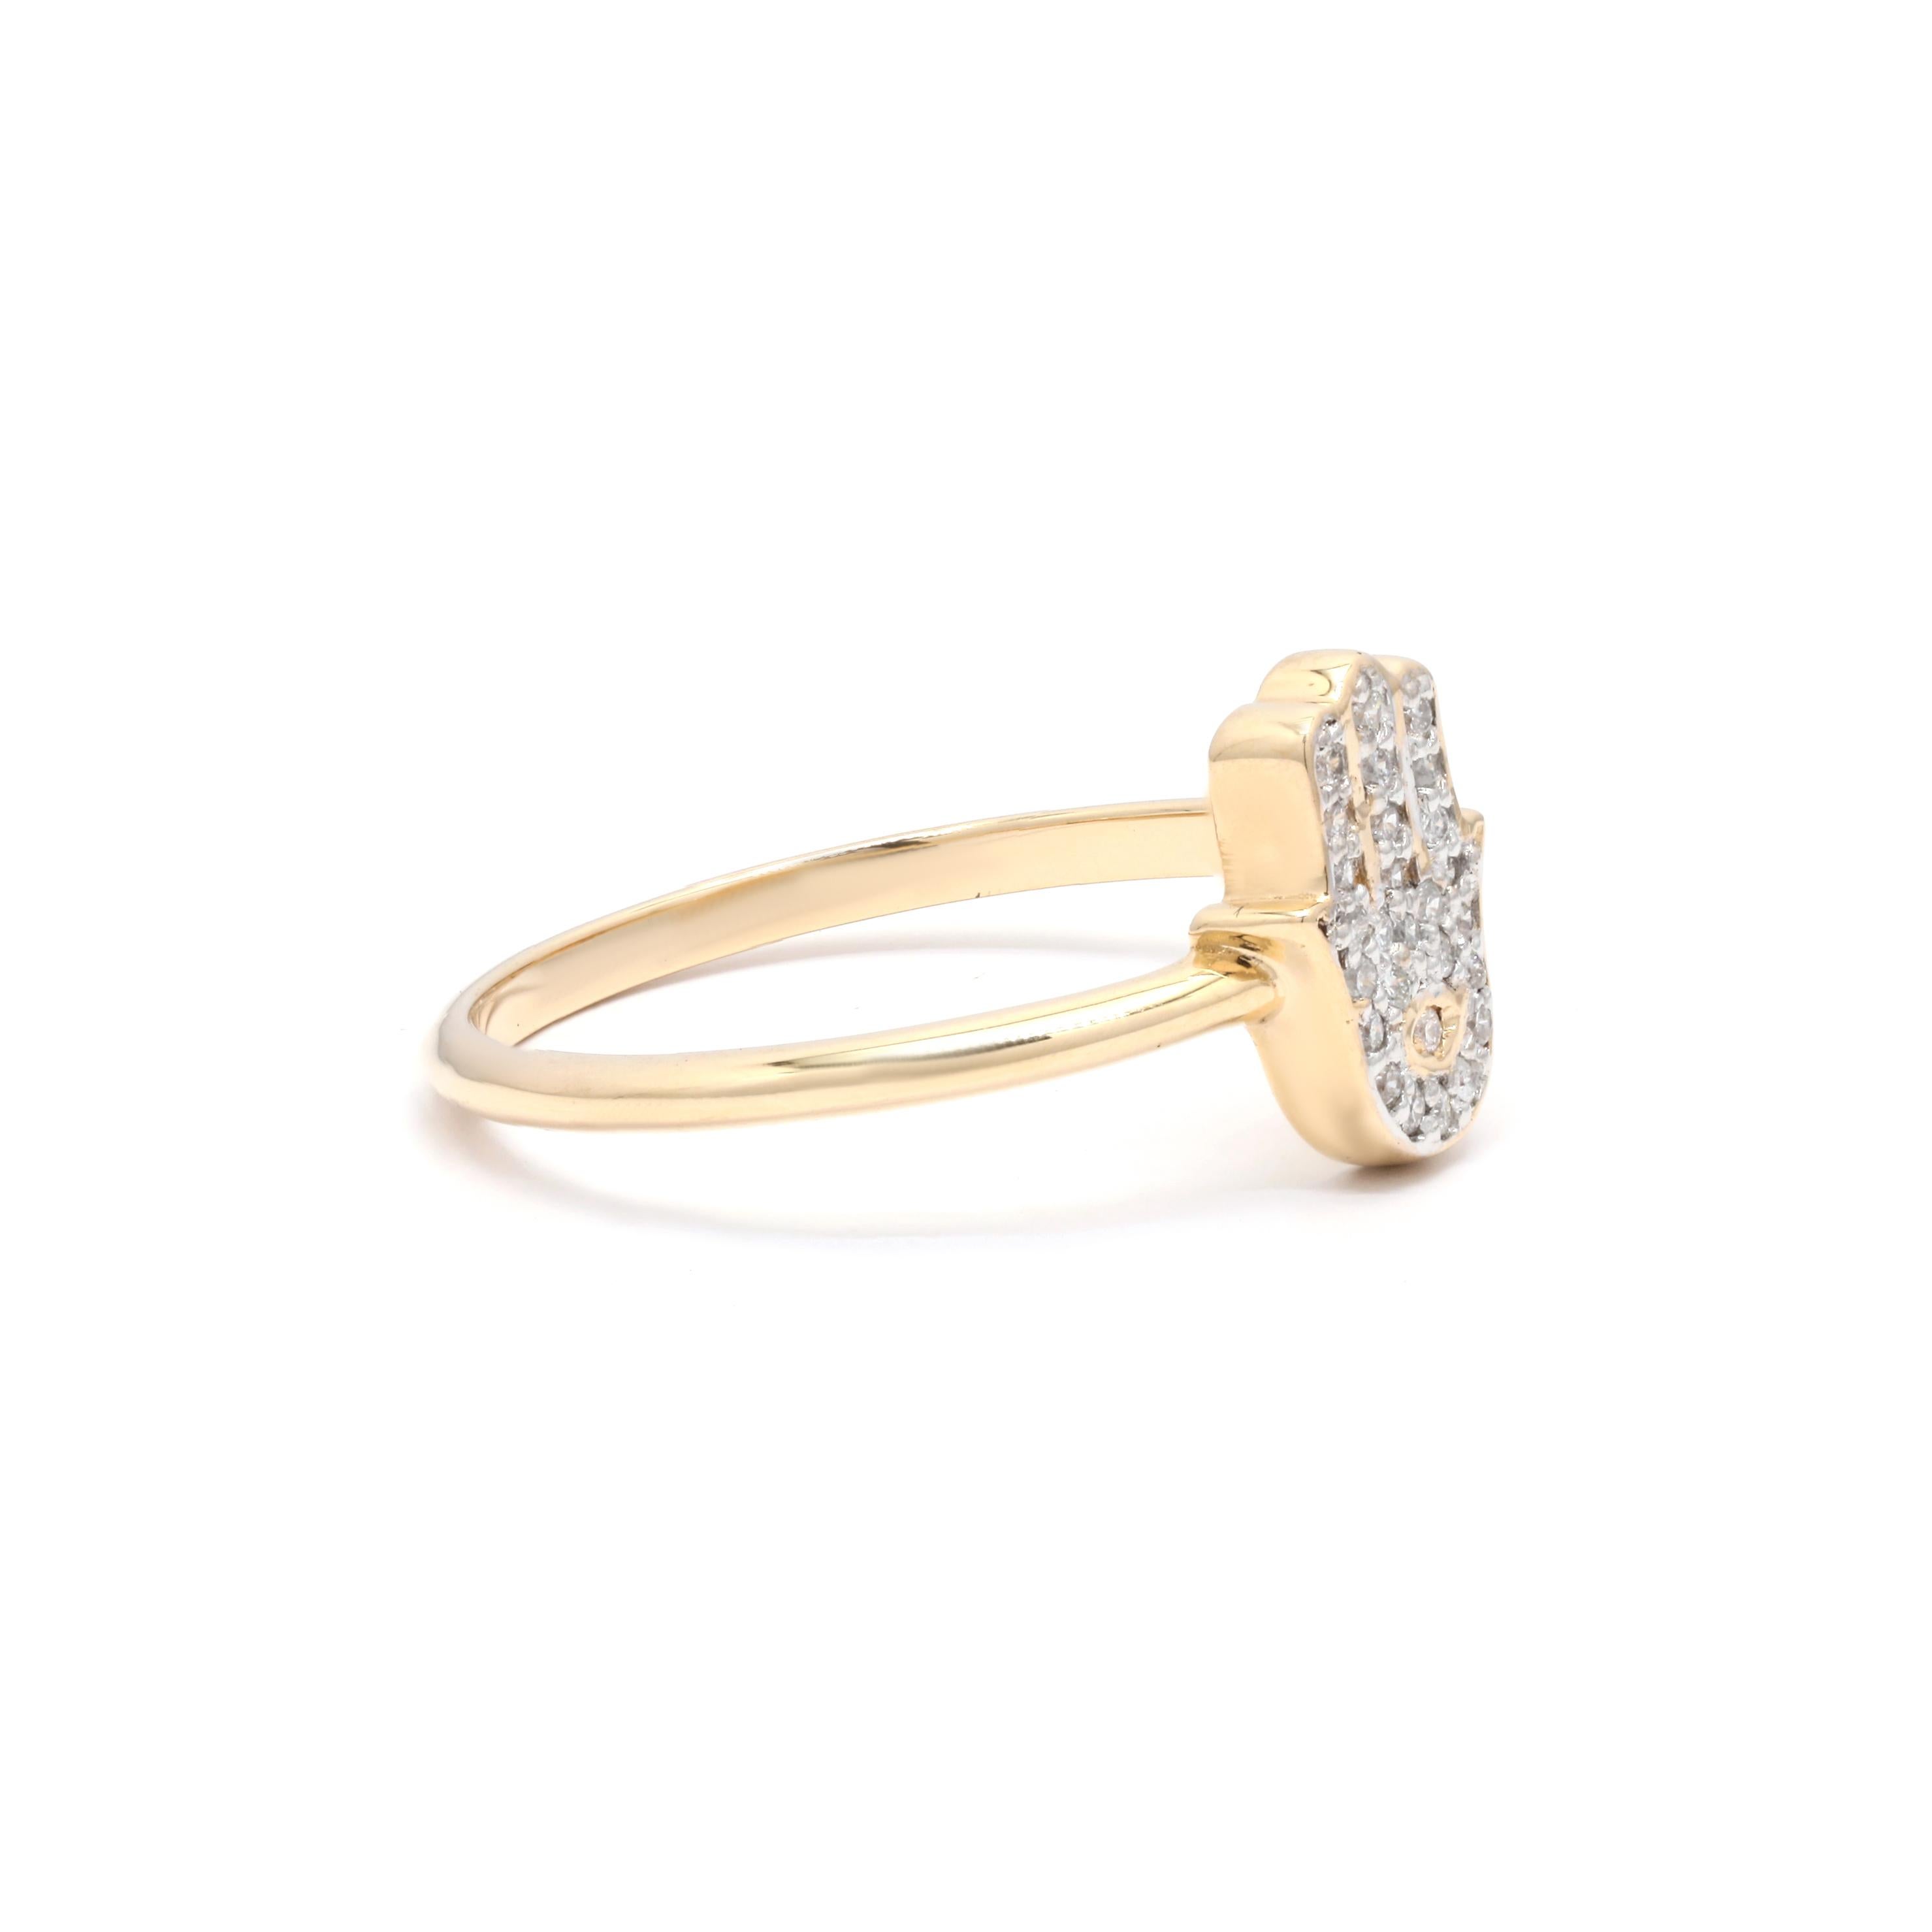 For Sale:  Dainty Hamsa Hand Diamond Ring in 14K Solid Yellow Gold 3